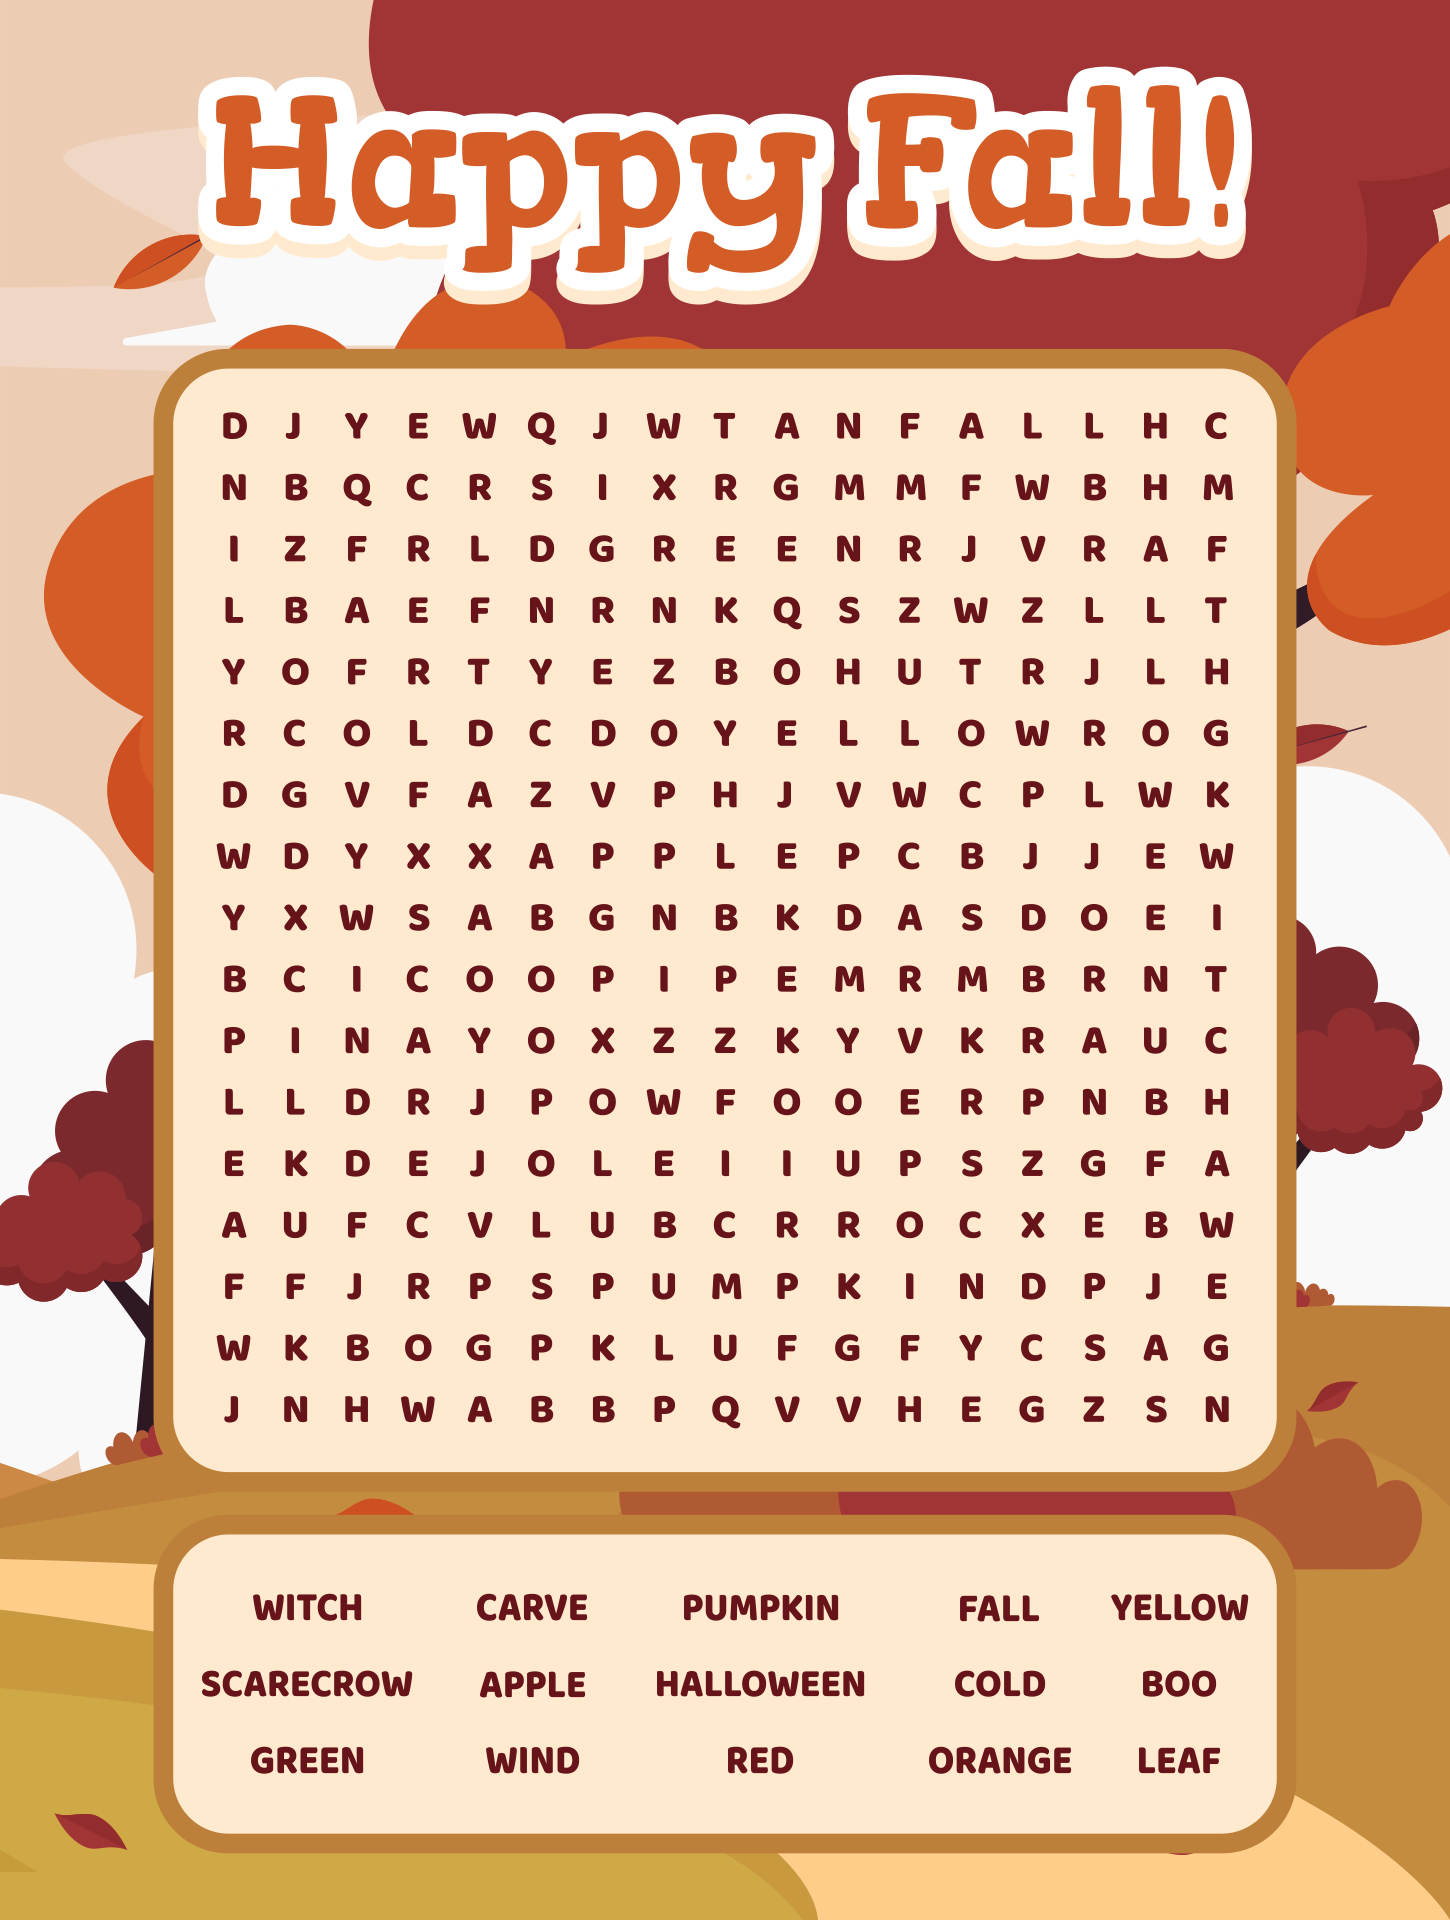 Printable Fall Word Search Puzzles